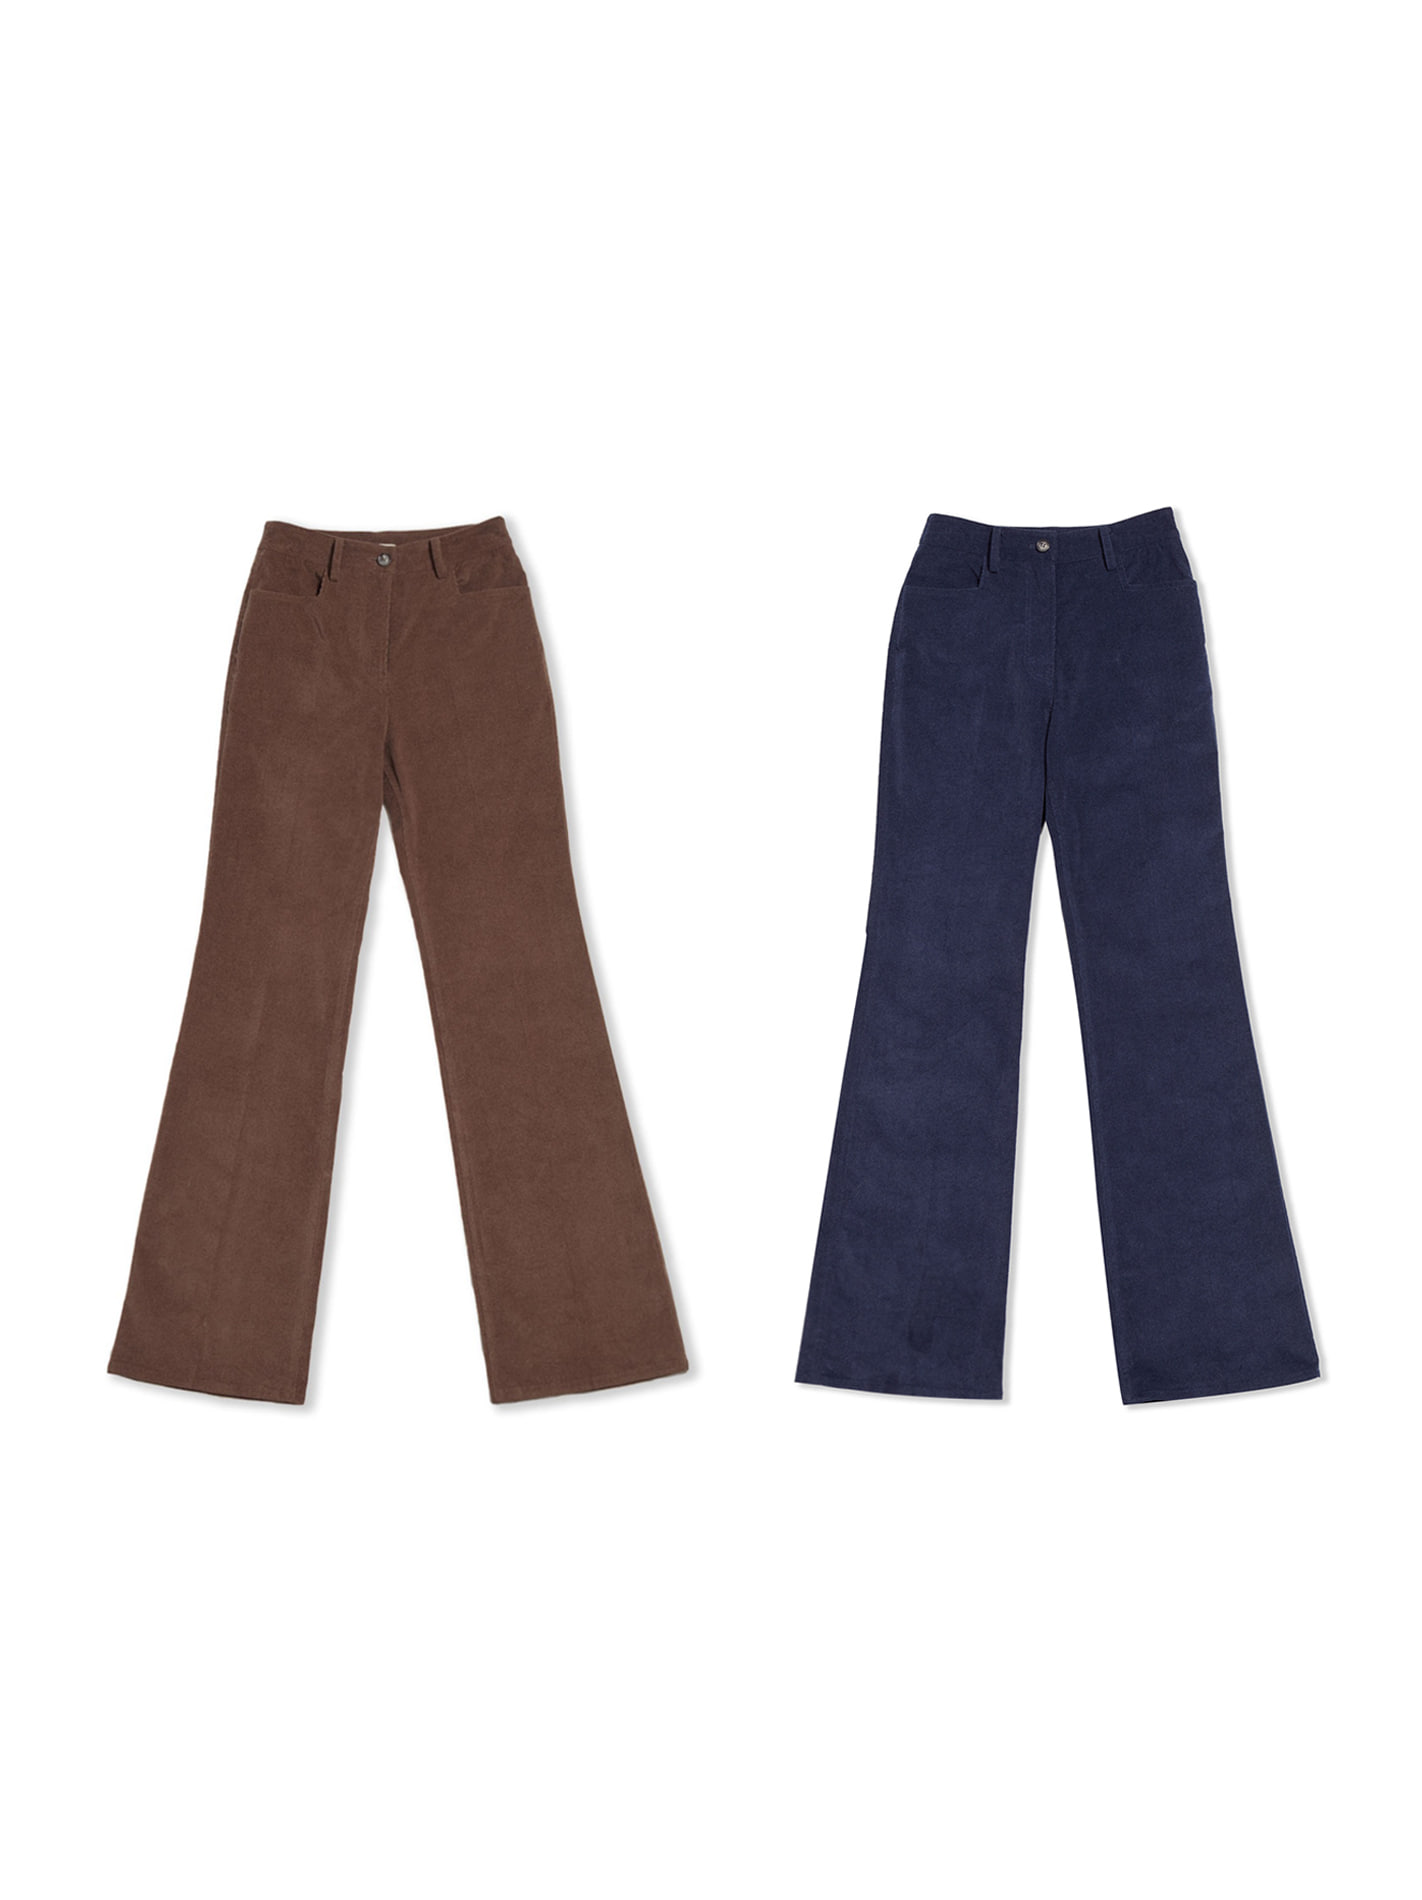 High-Rise Corduroy Trousers﻿ (2 Colors)